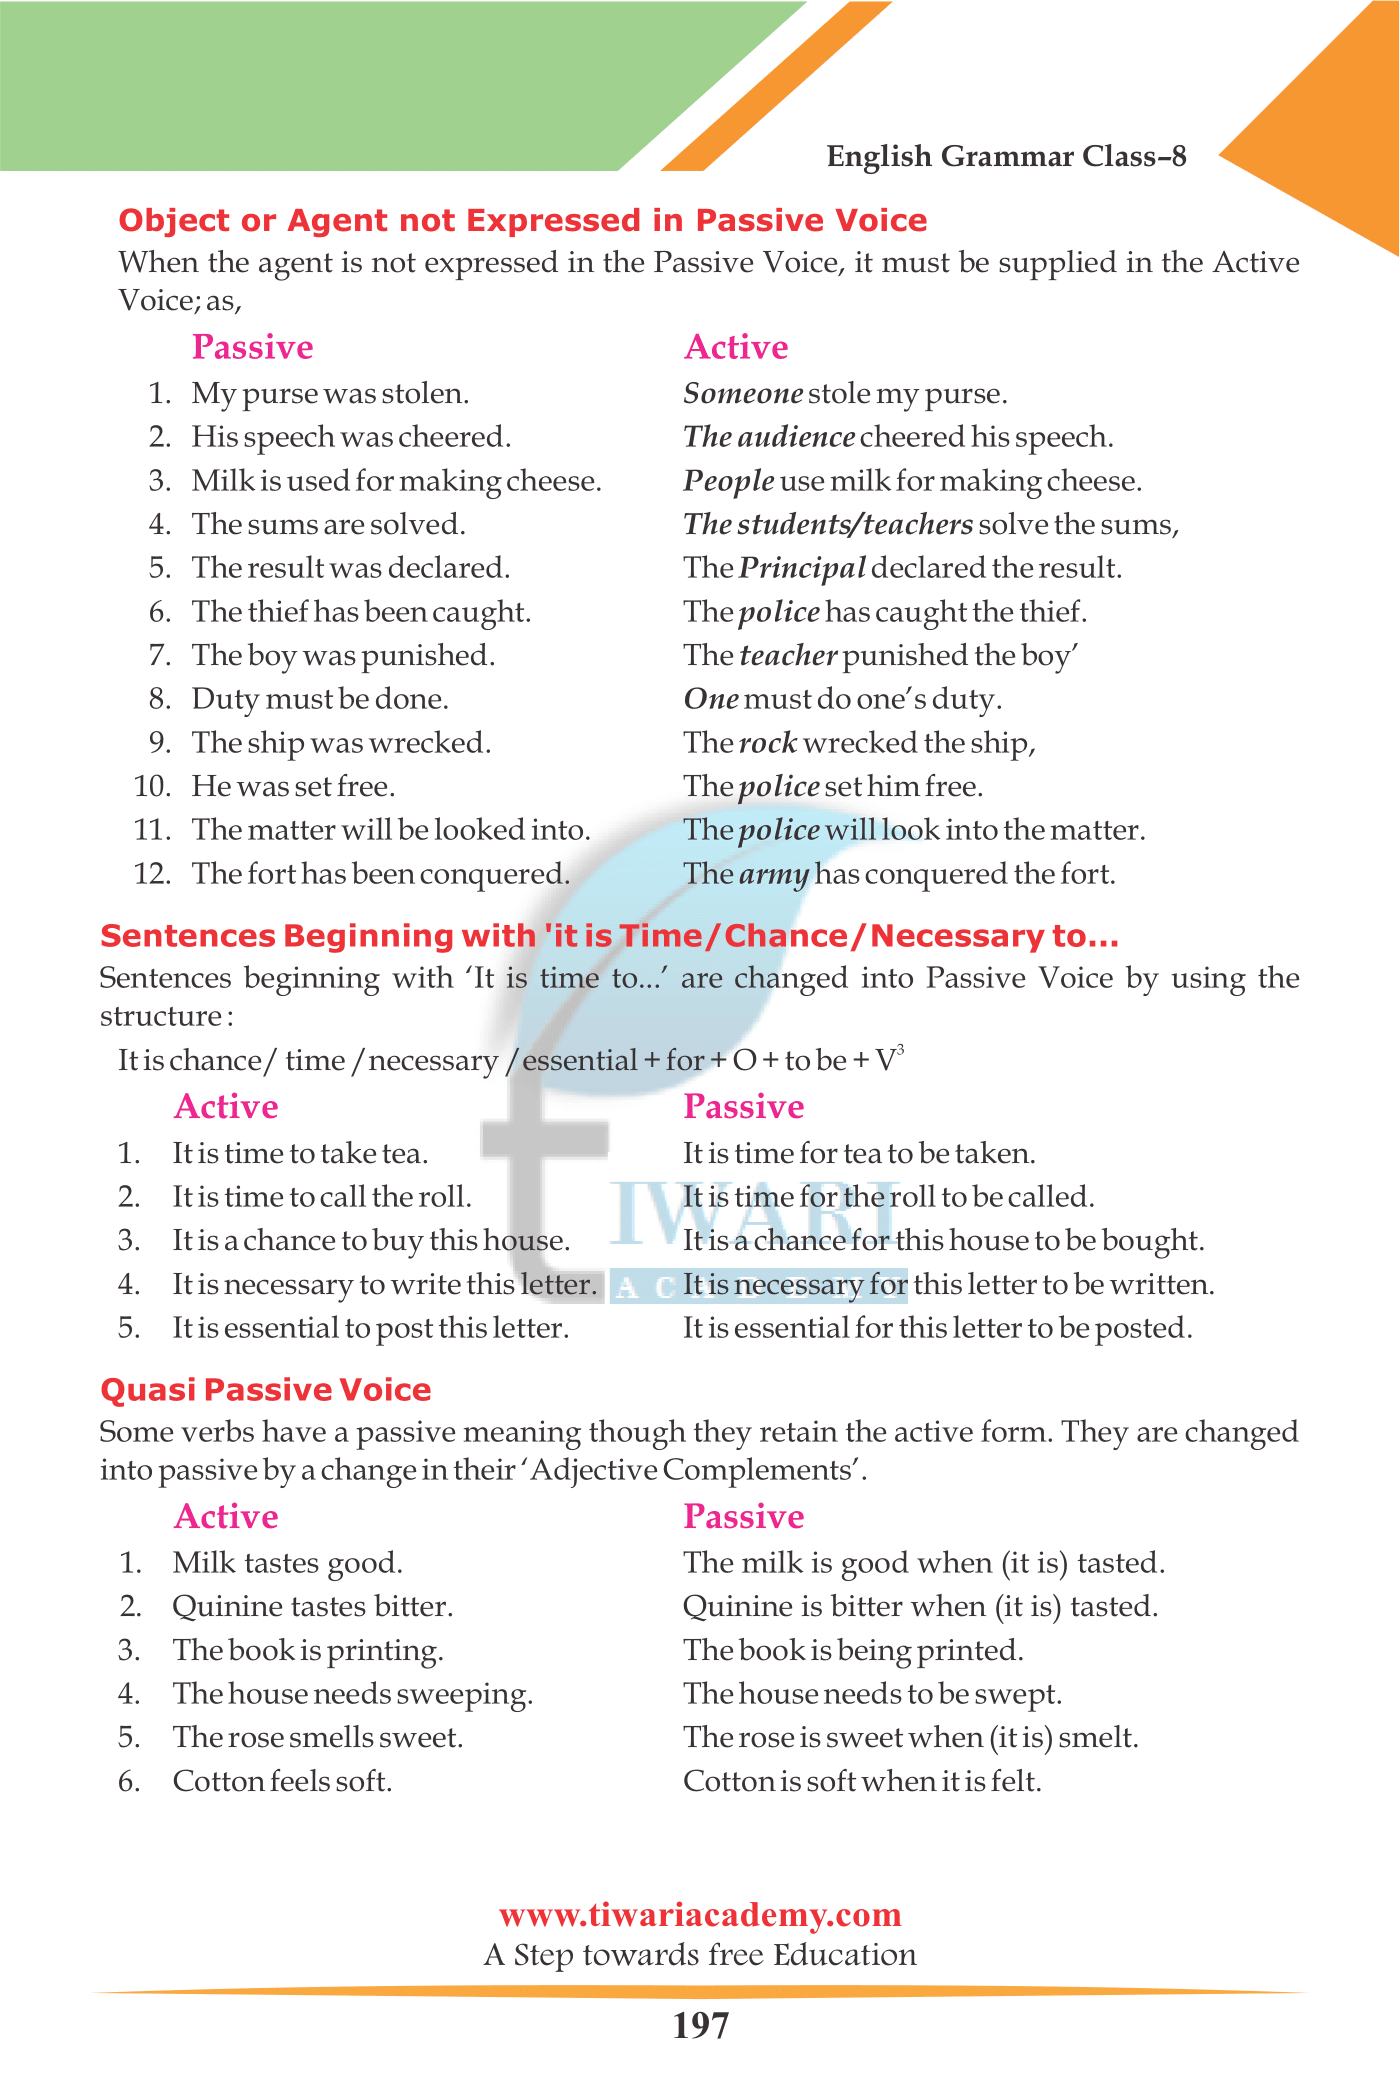 NCERT Solutions for Class 8 English Grammar Chapter 15 Active and Passive Voice